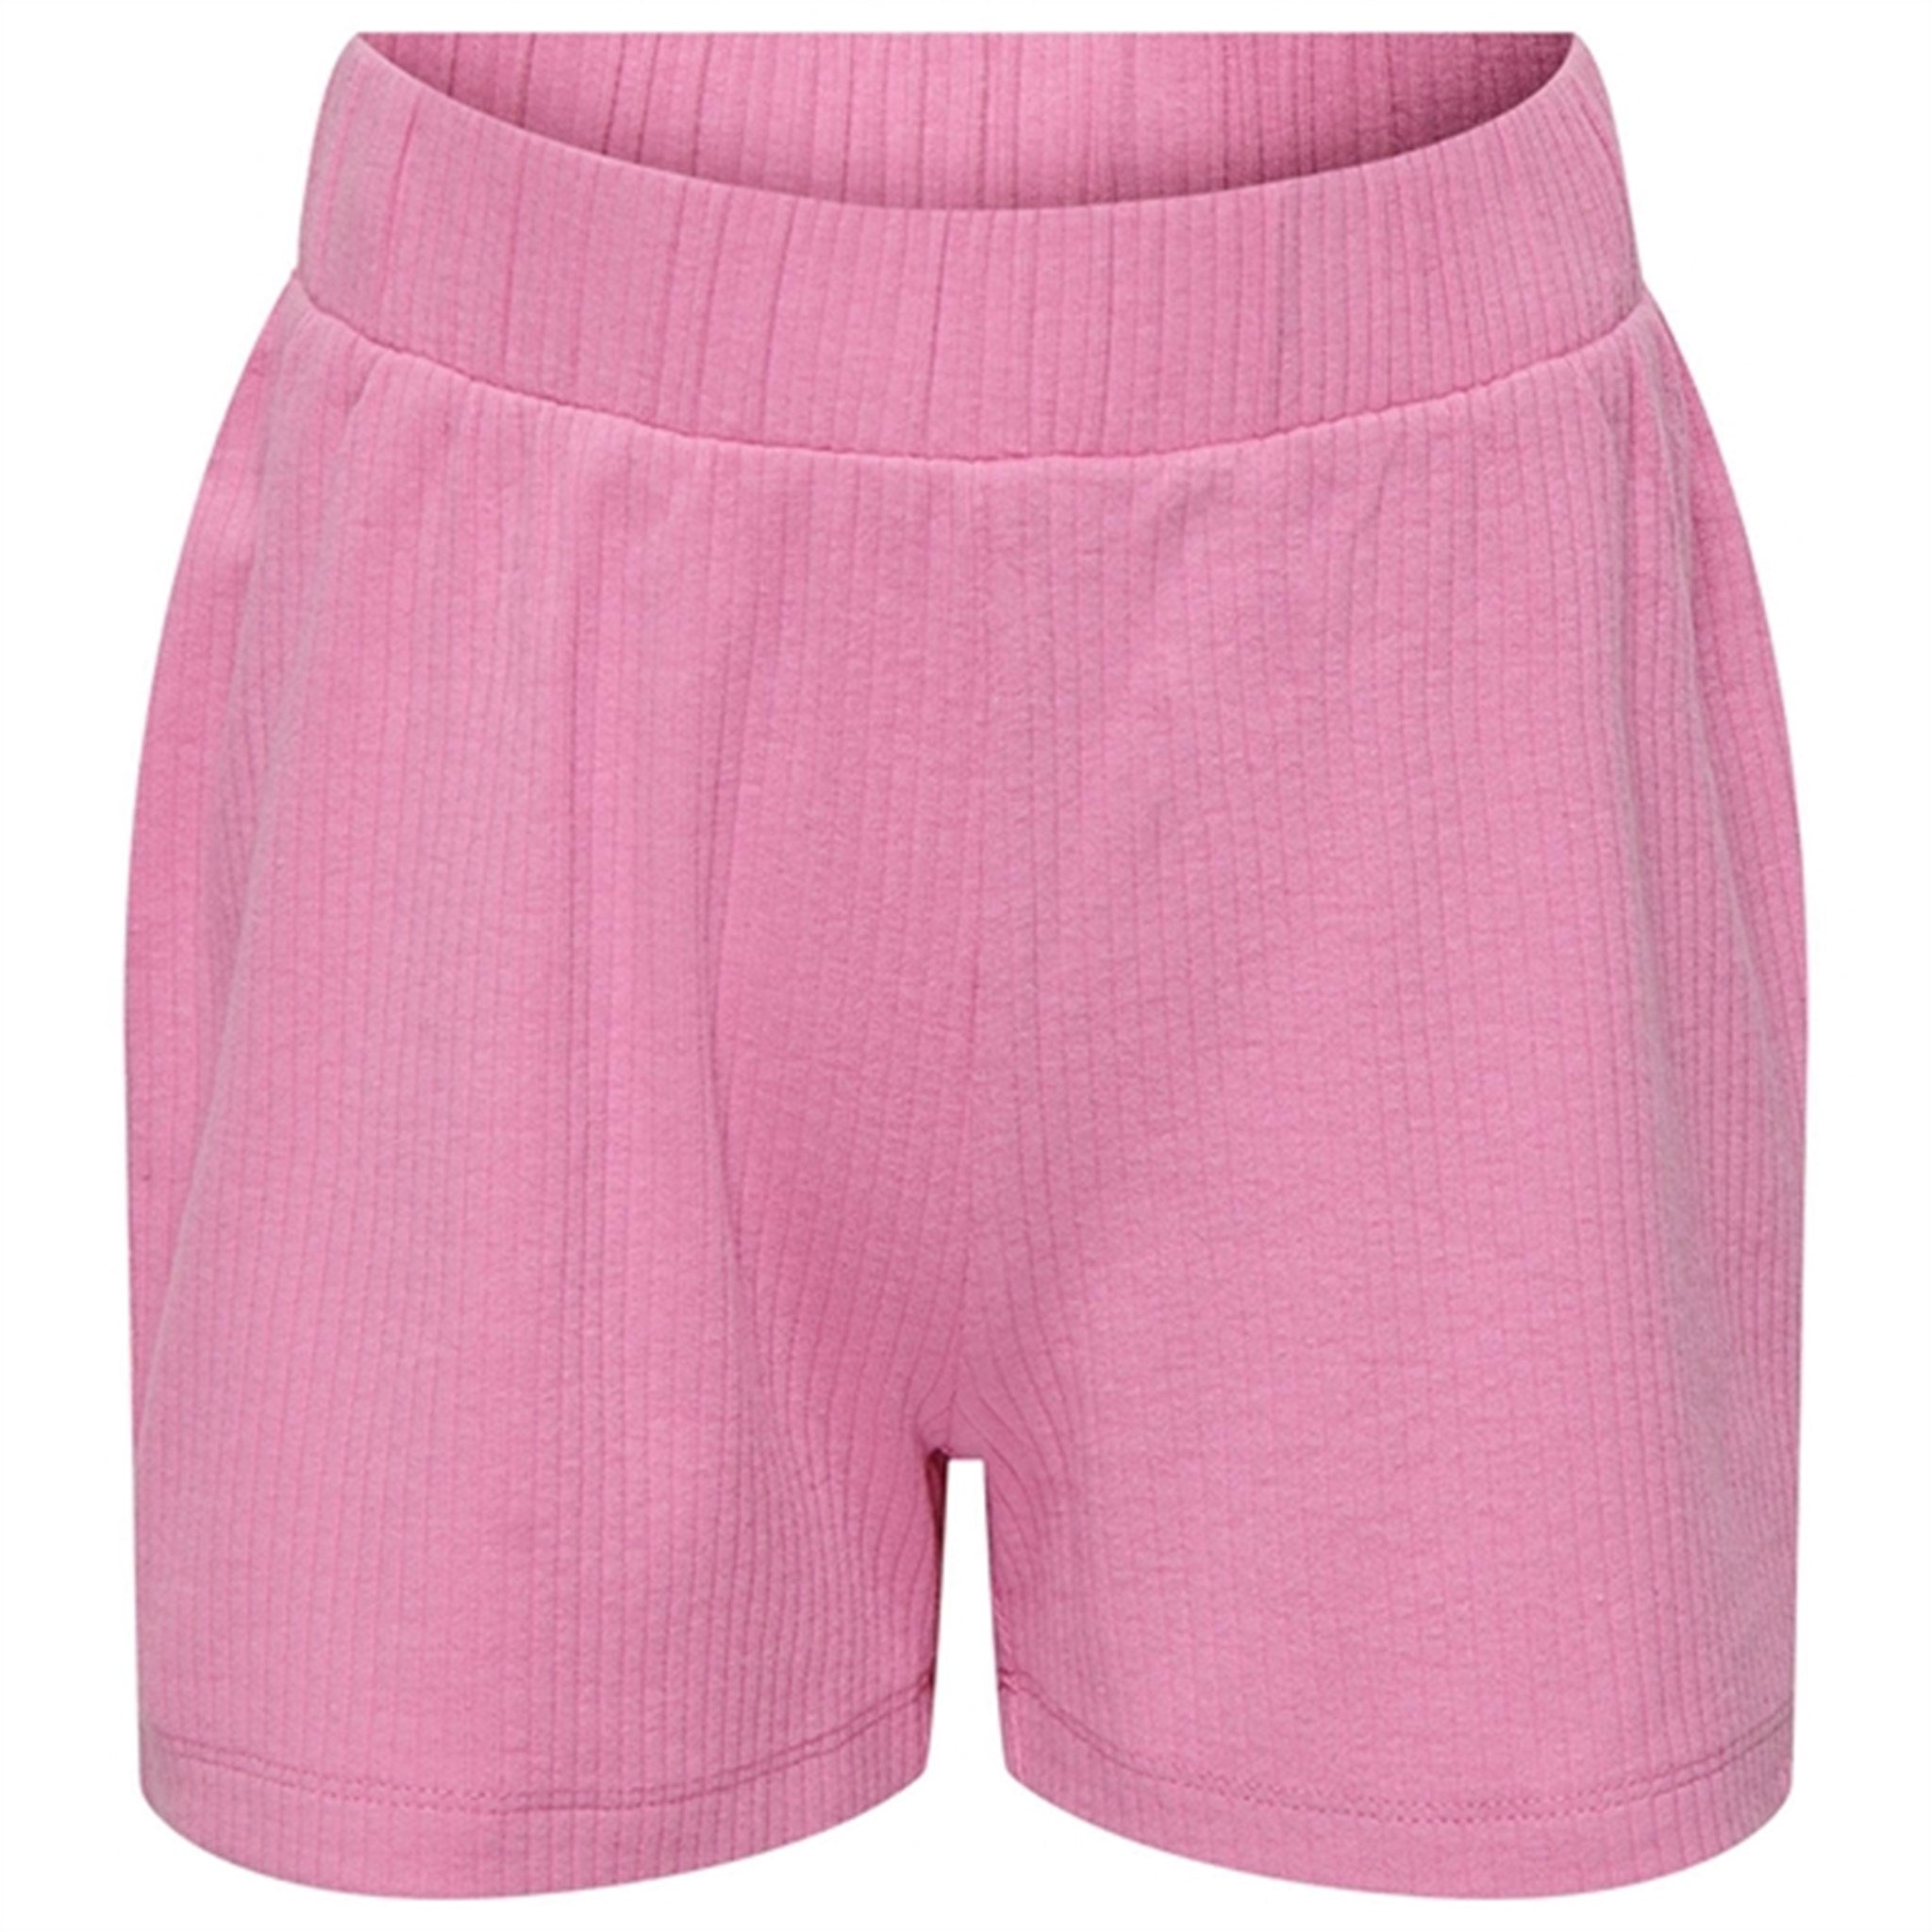 Kids ONLY Wild Orchid Sara Loungewear Shorts